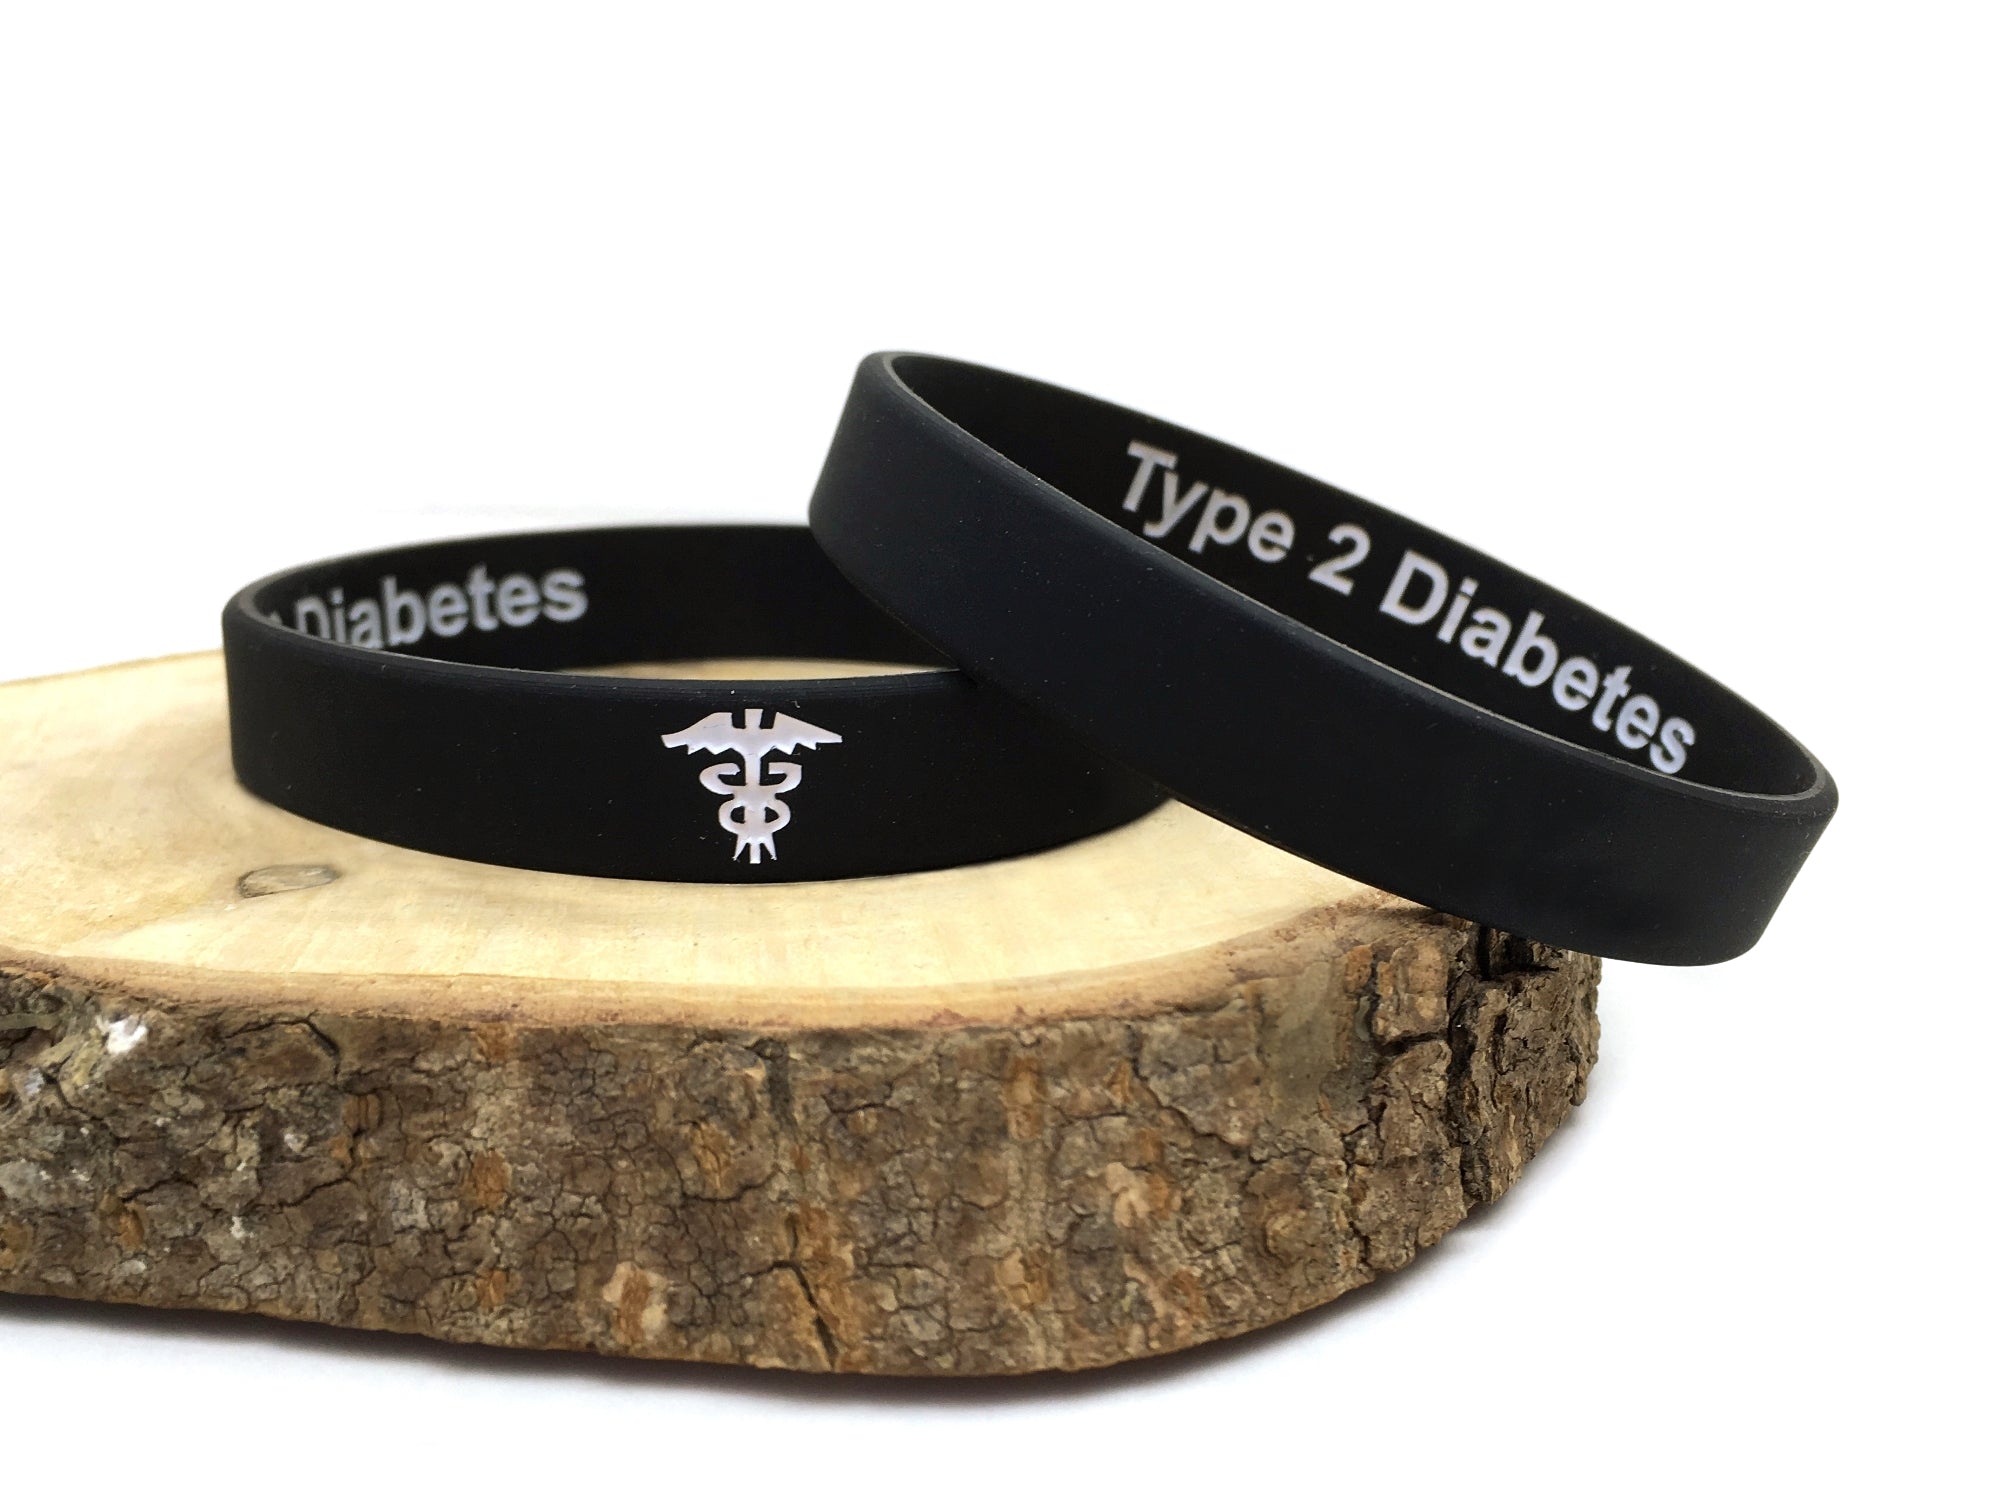 T1 or T2 Diabetes Hidden Message Silicone Wristband